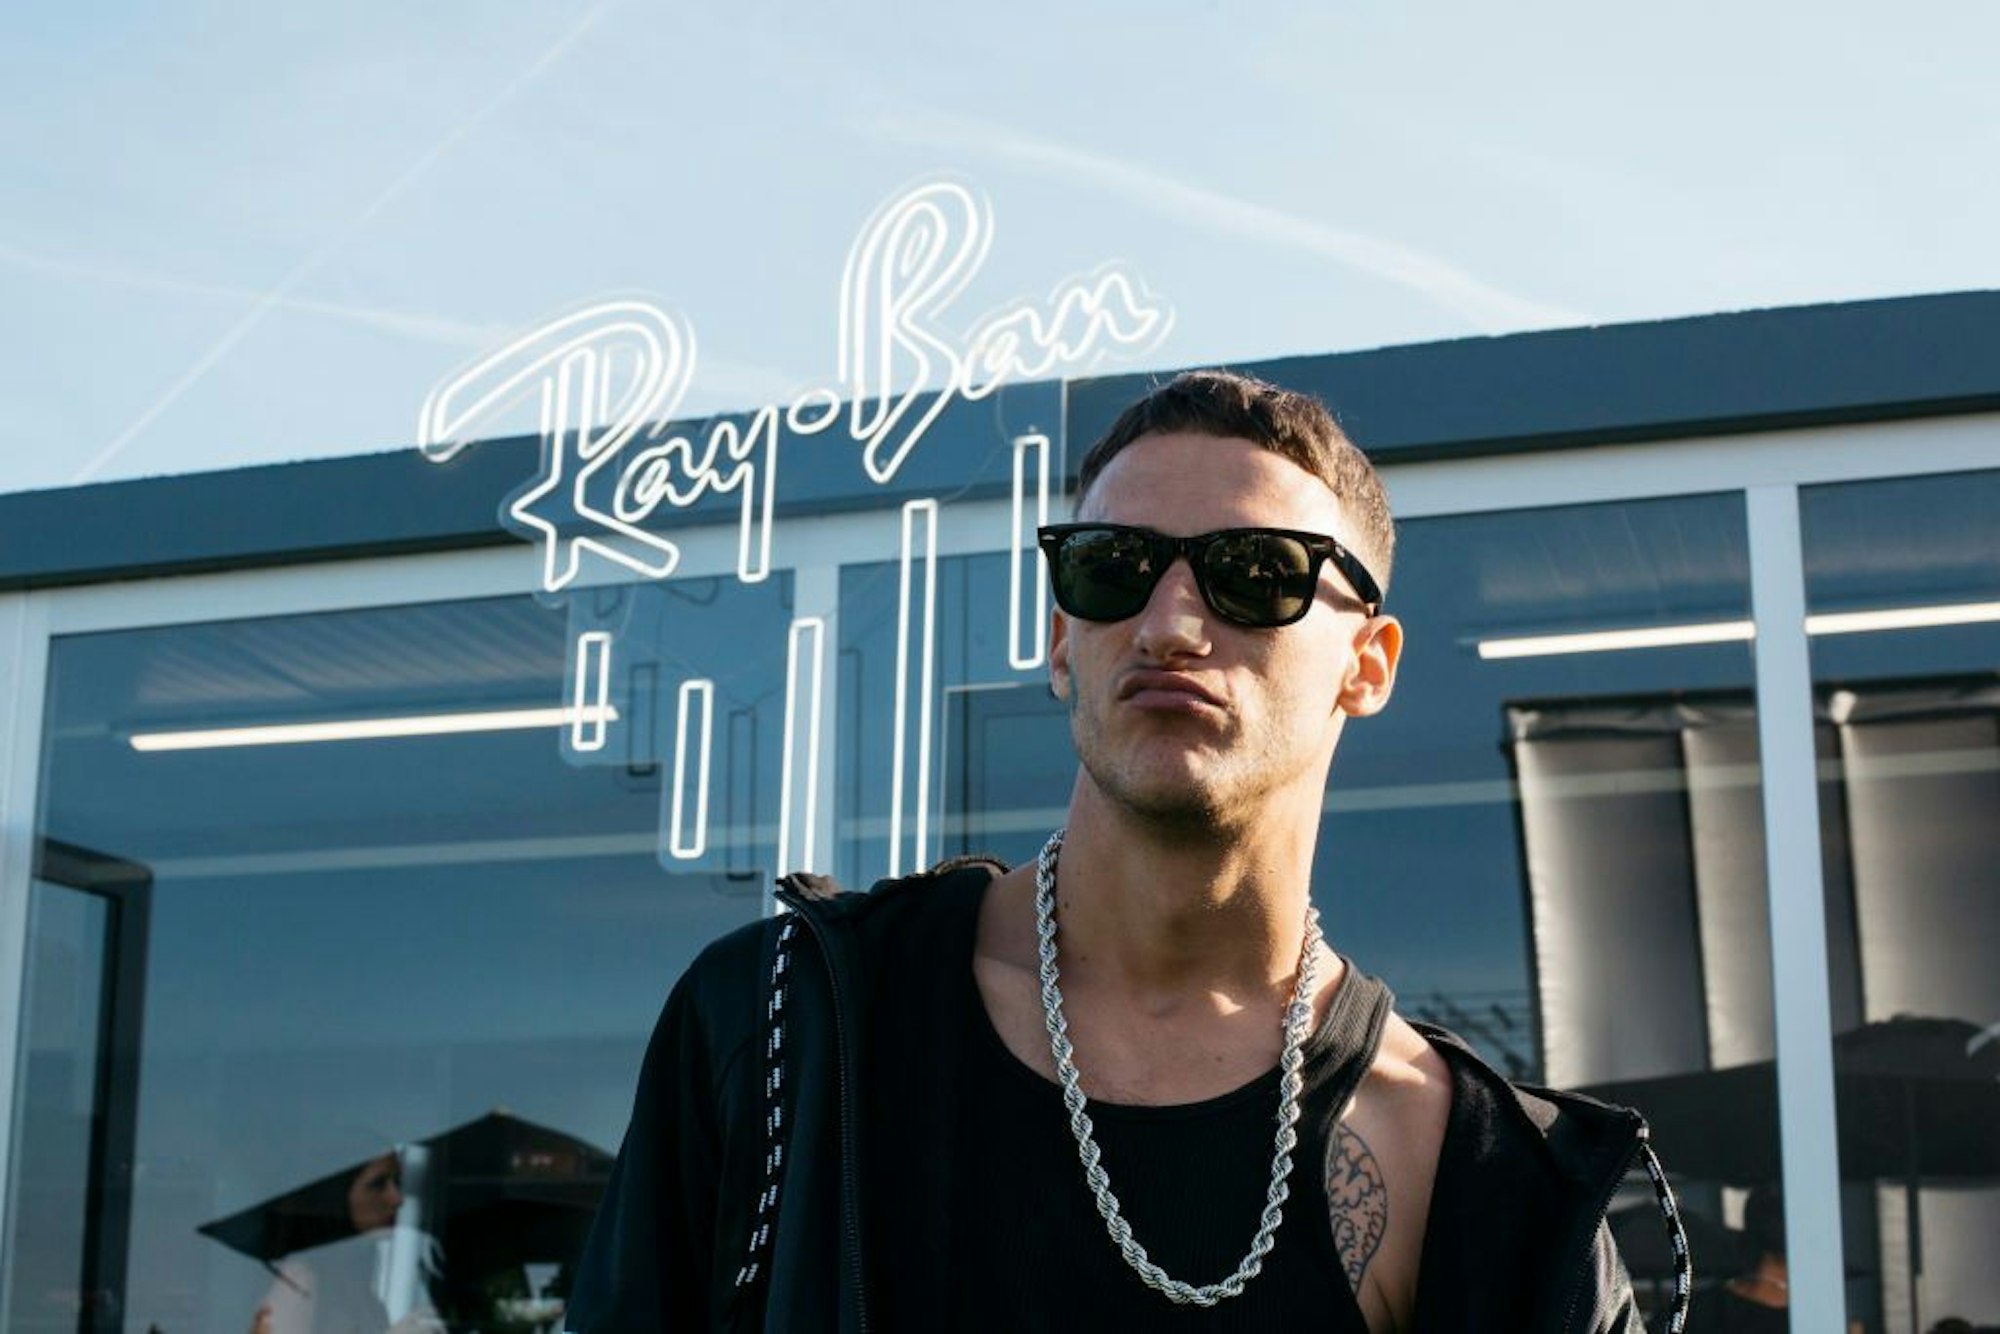 MADRID, SPAIN - MAY 30: In this handout photo provided by Ray-Ban,  Yung Beef attends Ray-Ban suite at Primavera Sound Festival Motel on May 30, 2019 in Madrid, Spain. (Photo by Sergio Albert/Ray-Ban via Getty Images)